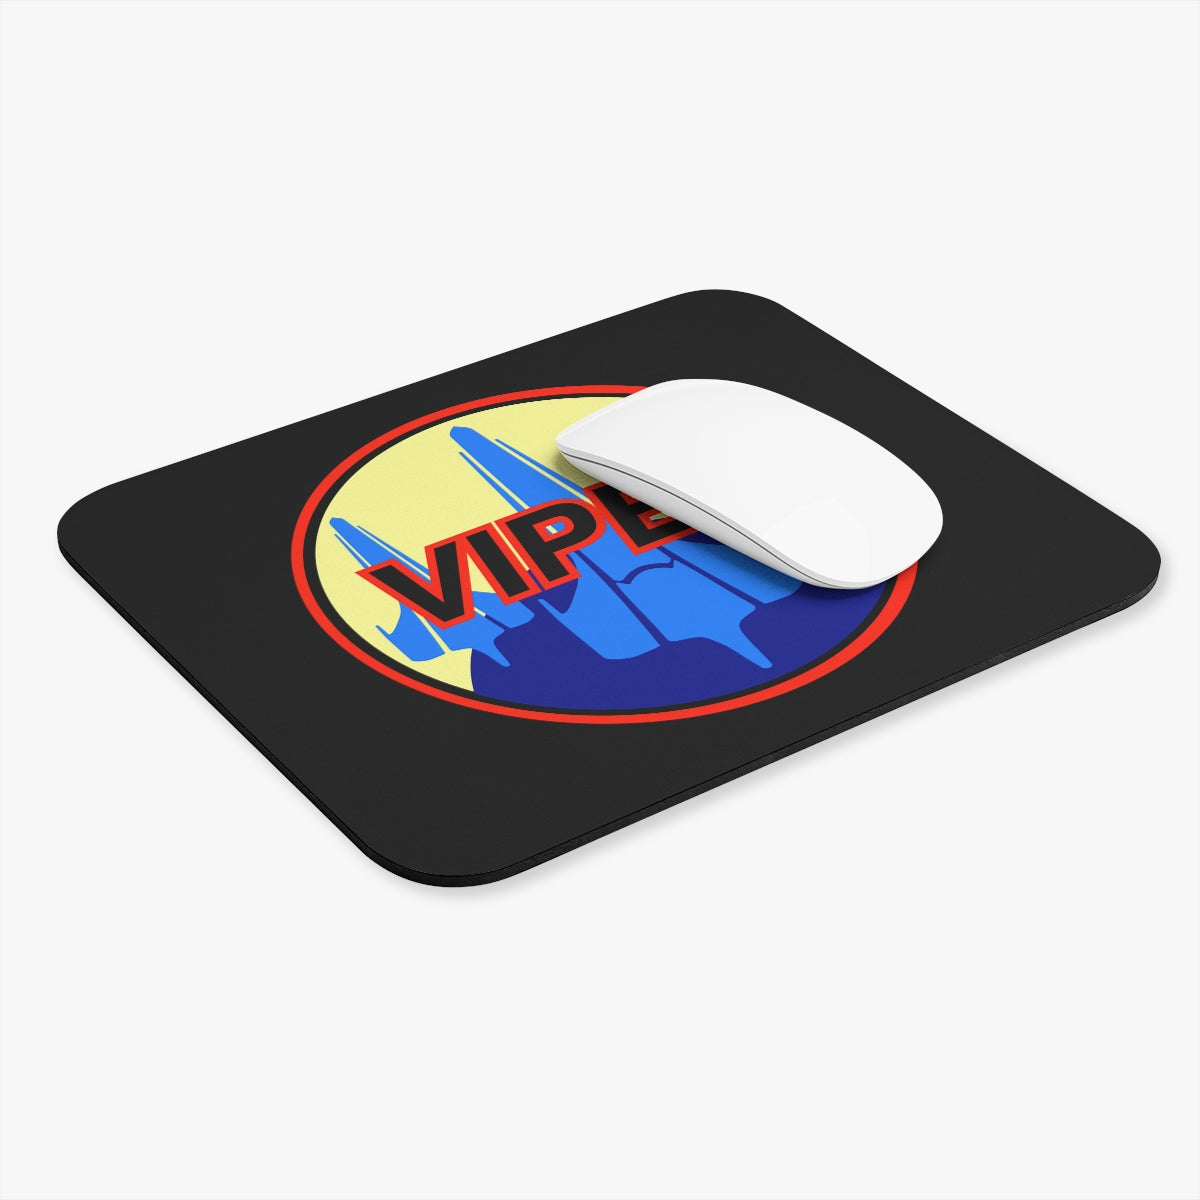 BSG Viper Mouse Pad (Rectangle)